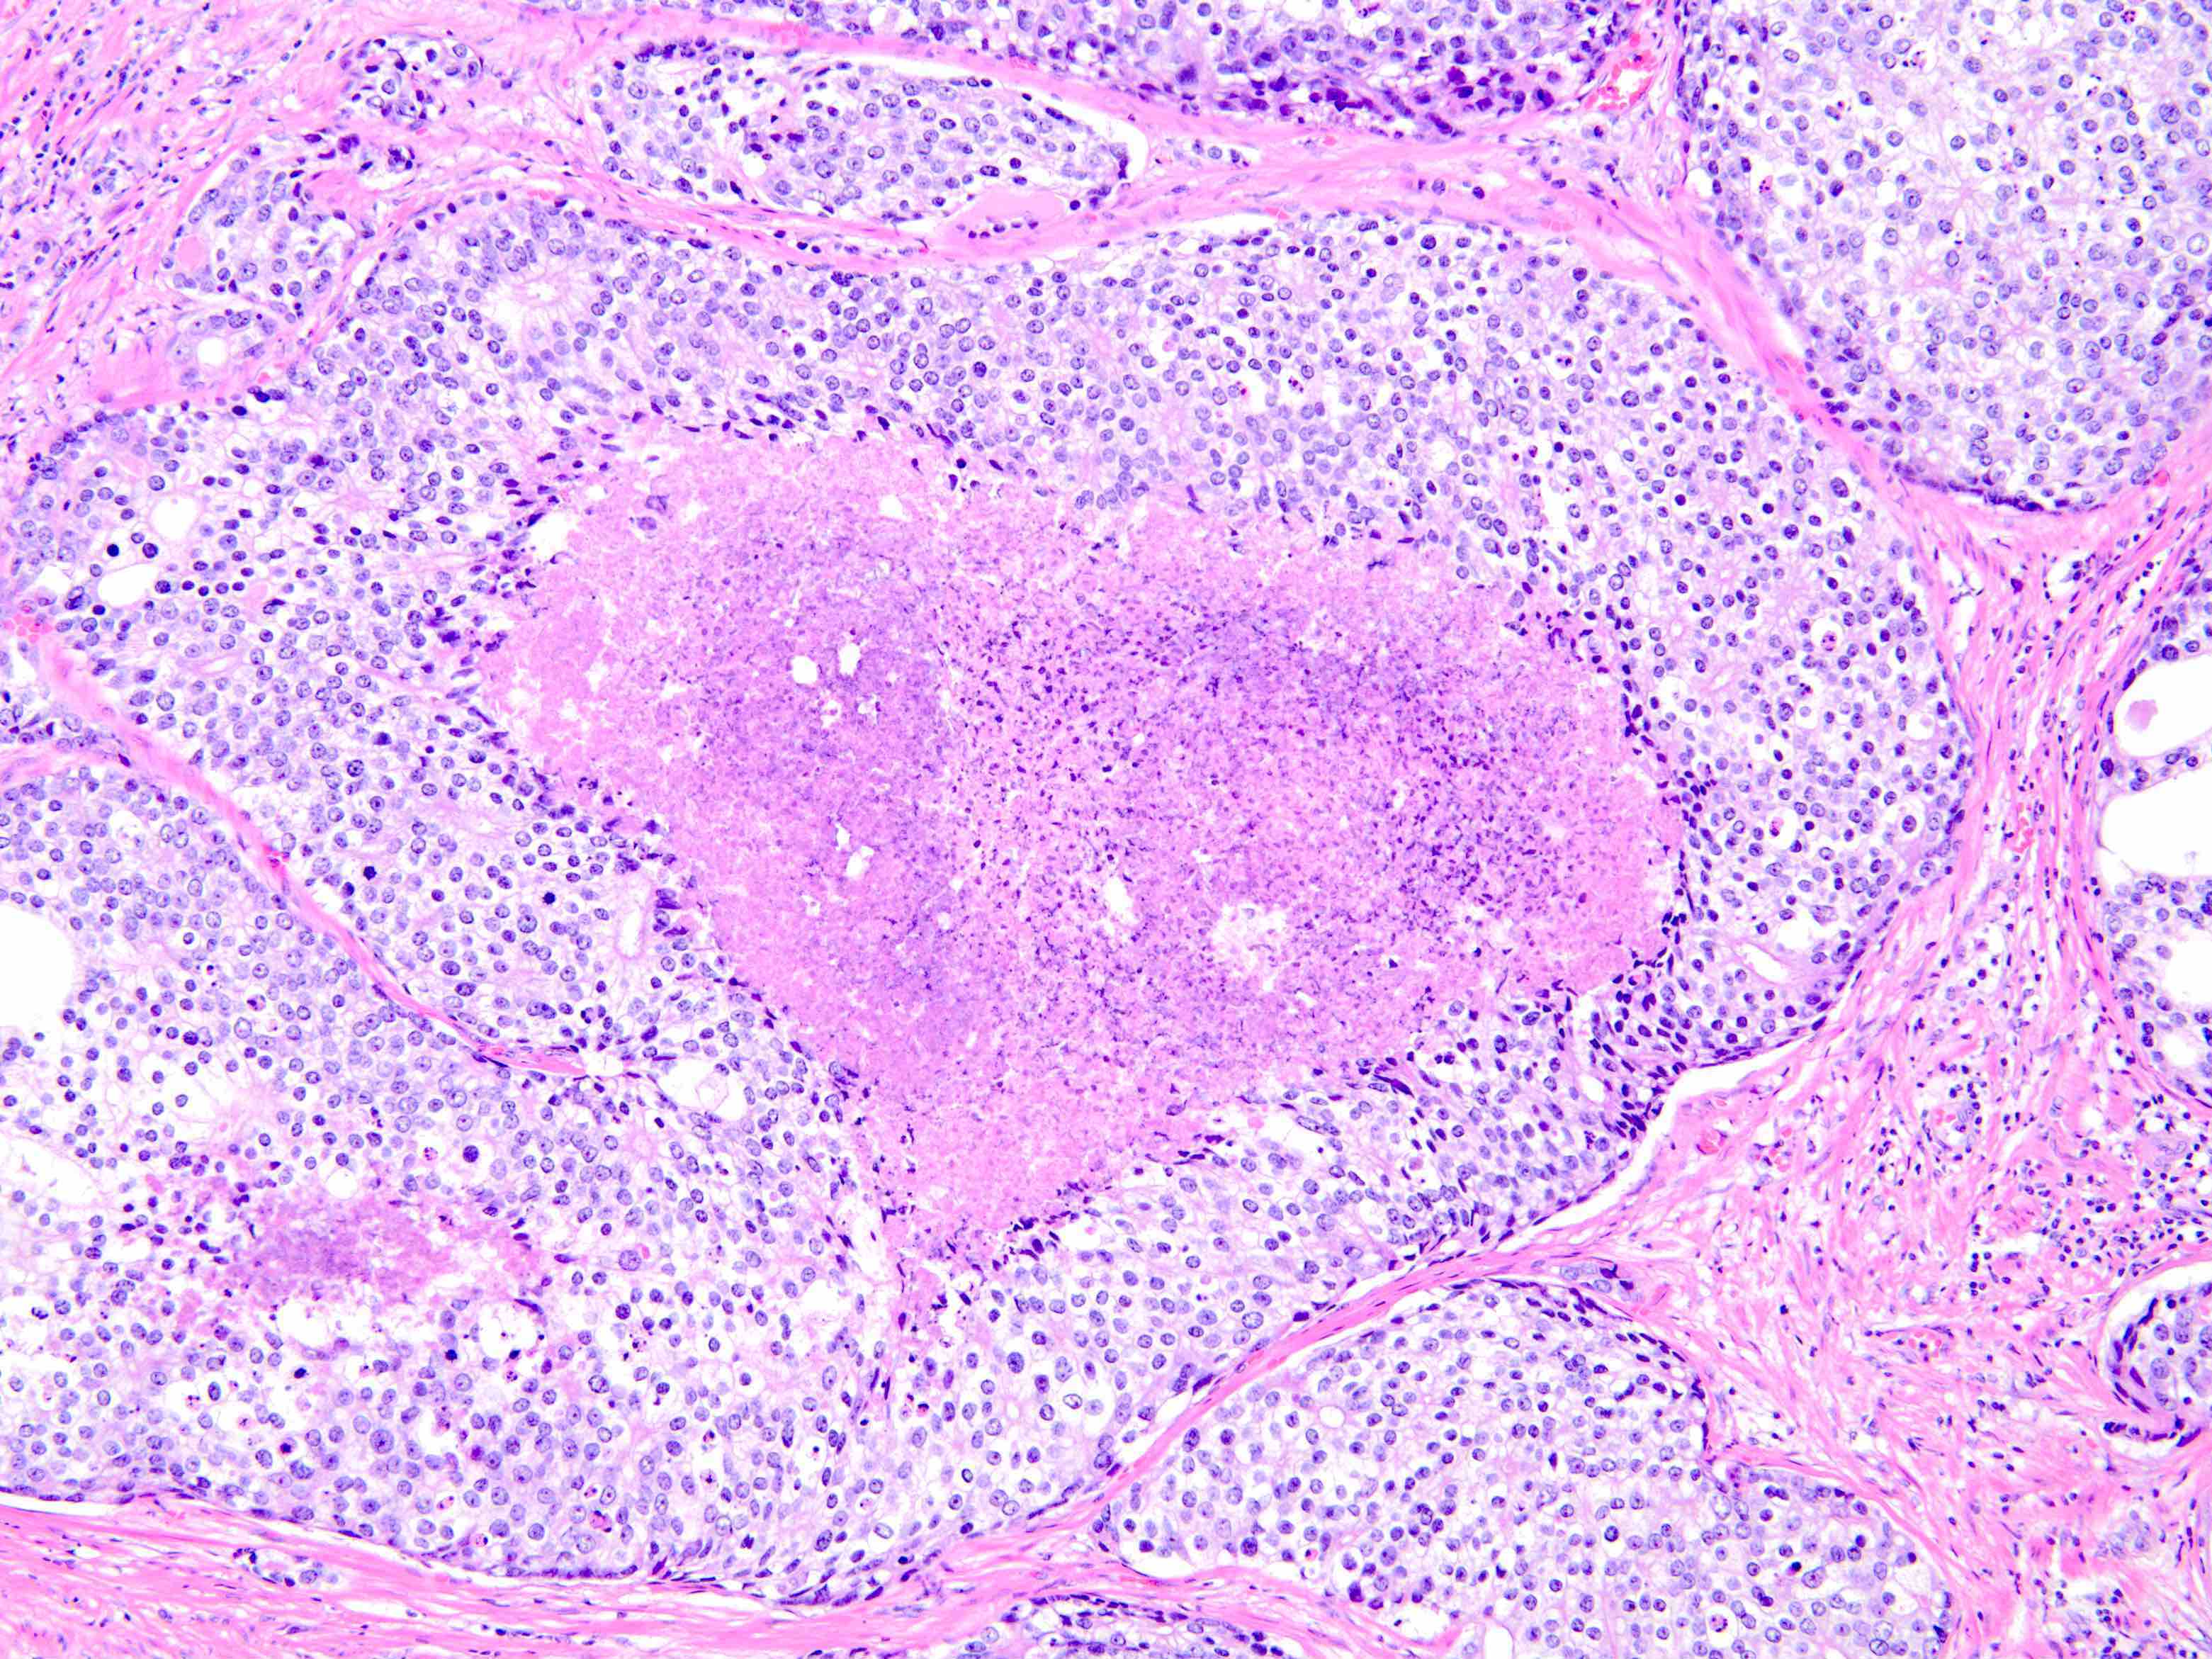 ductal adenocarcinoma prostate histology)